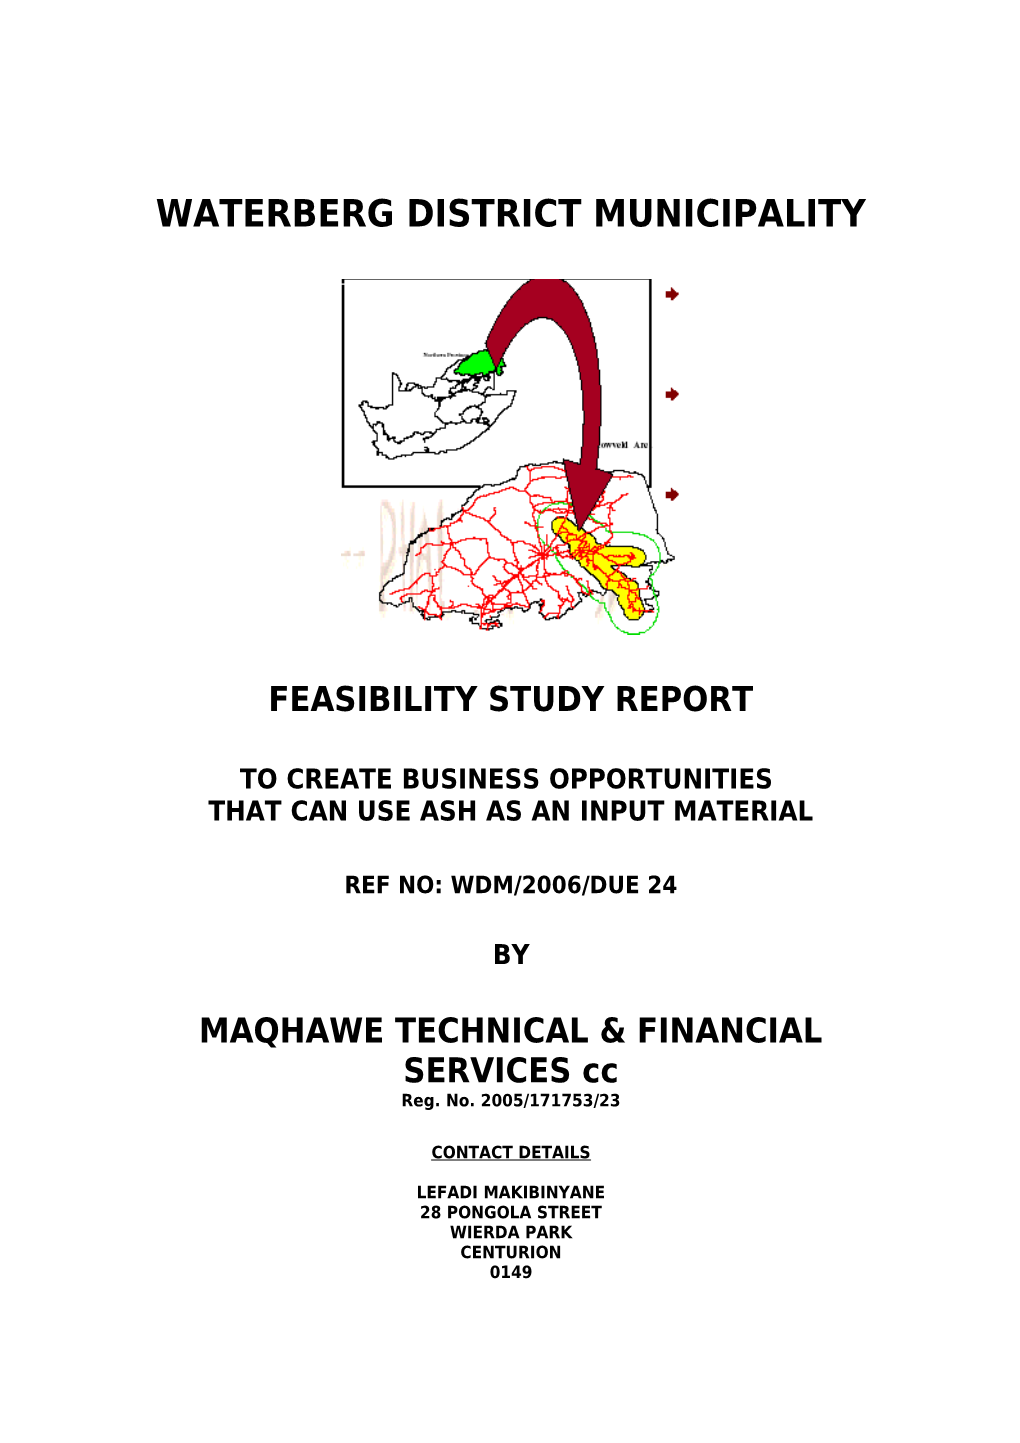 For the Waterberg District Municipality